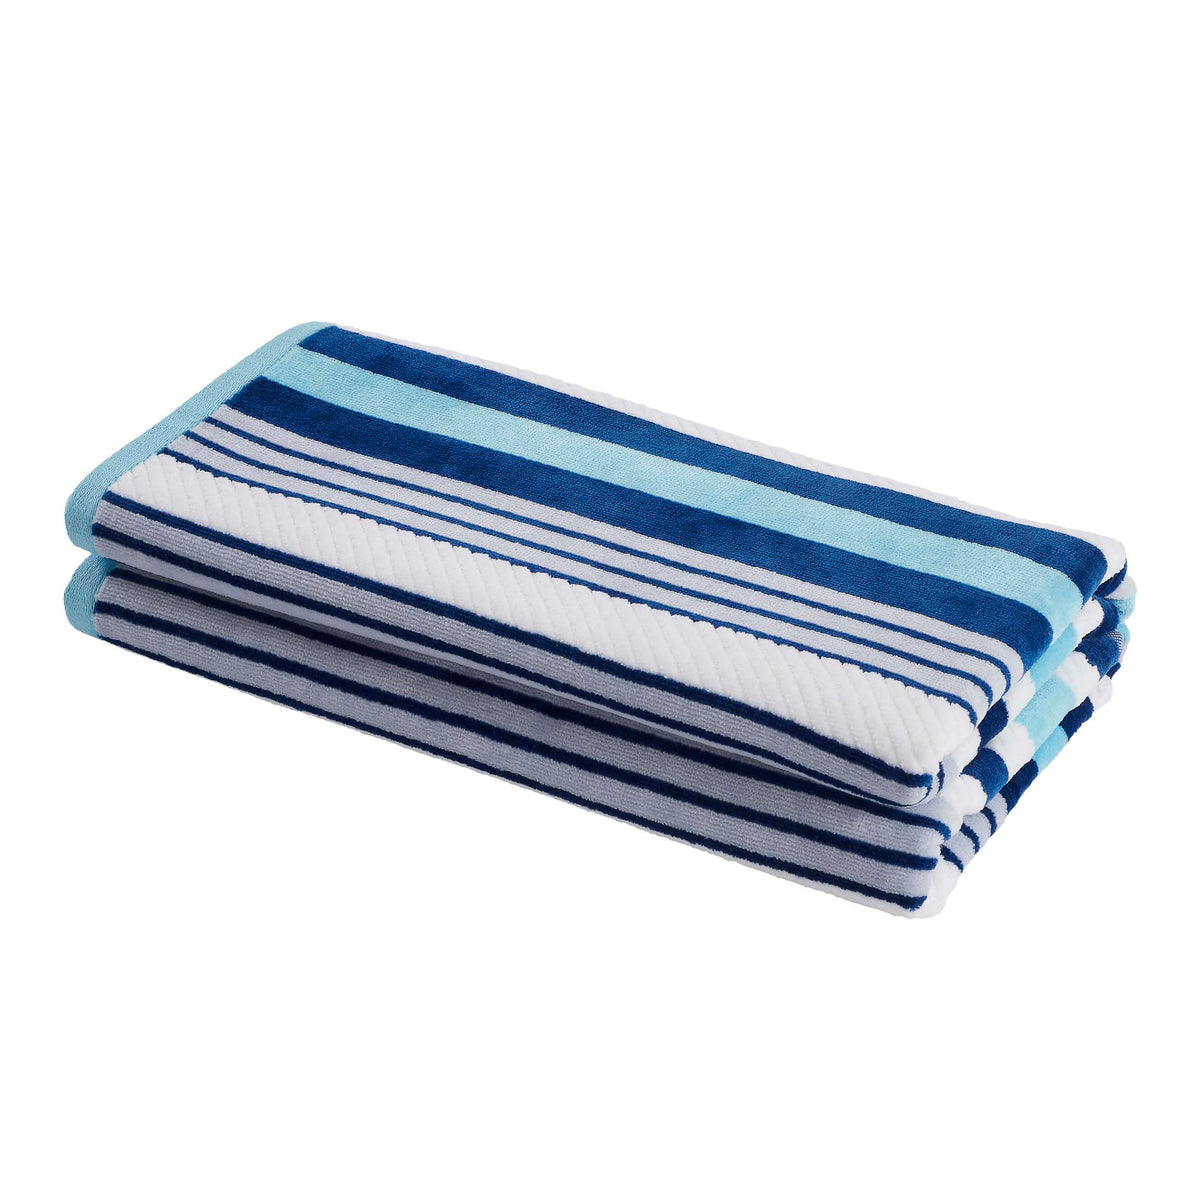 2 Piece Rope Textured Striped Oversized Cotton Beach Towel Set - SkyBlue